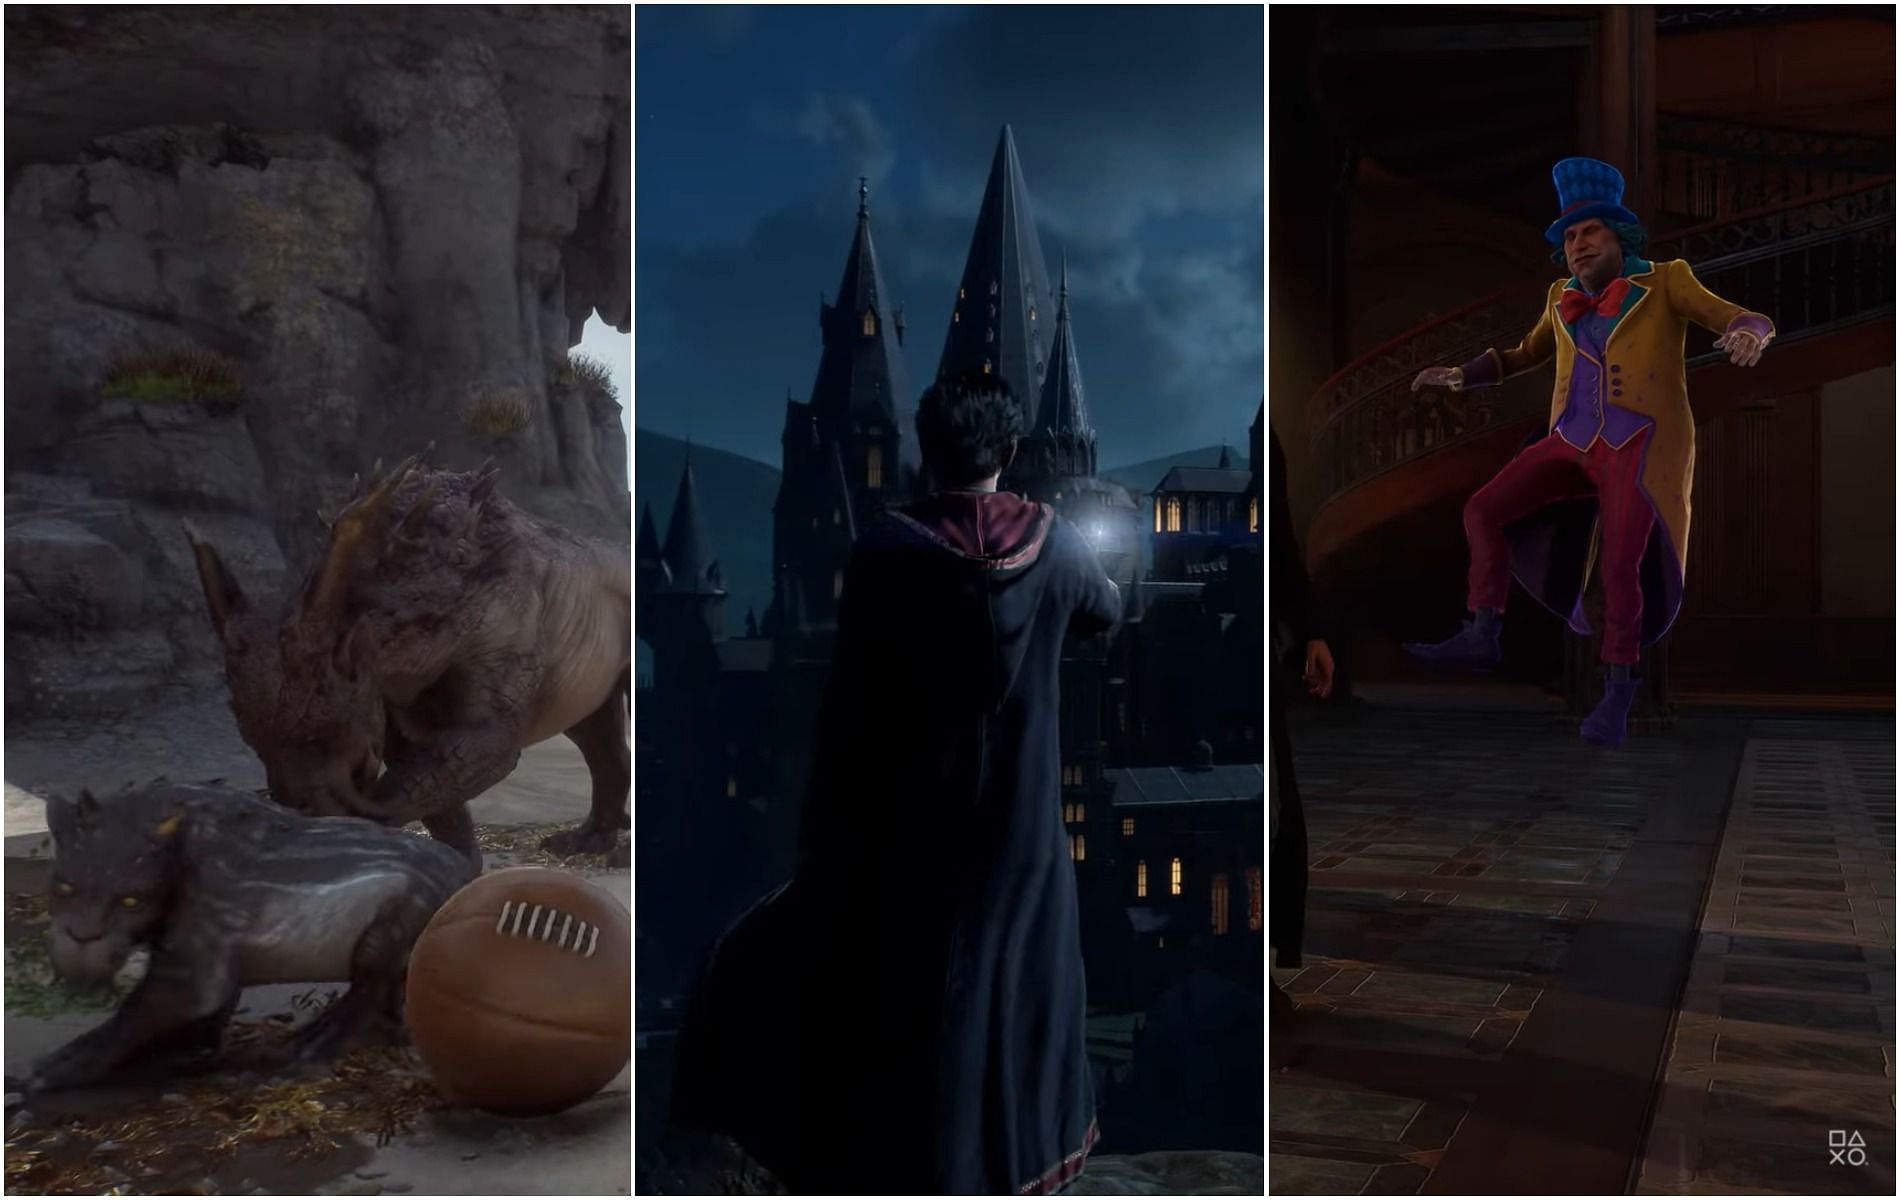 Five things fans might have missed in the Hogwarts Legacy clip (Image by WB Games)